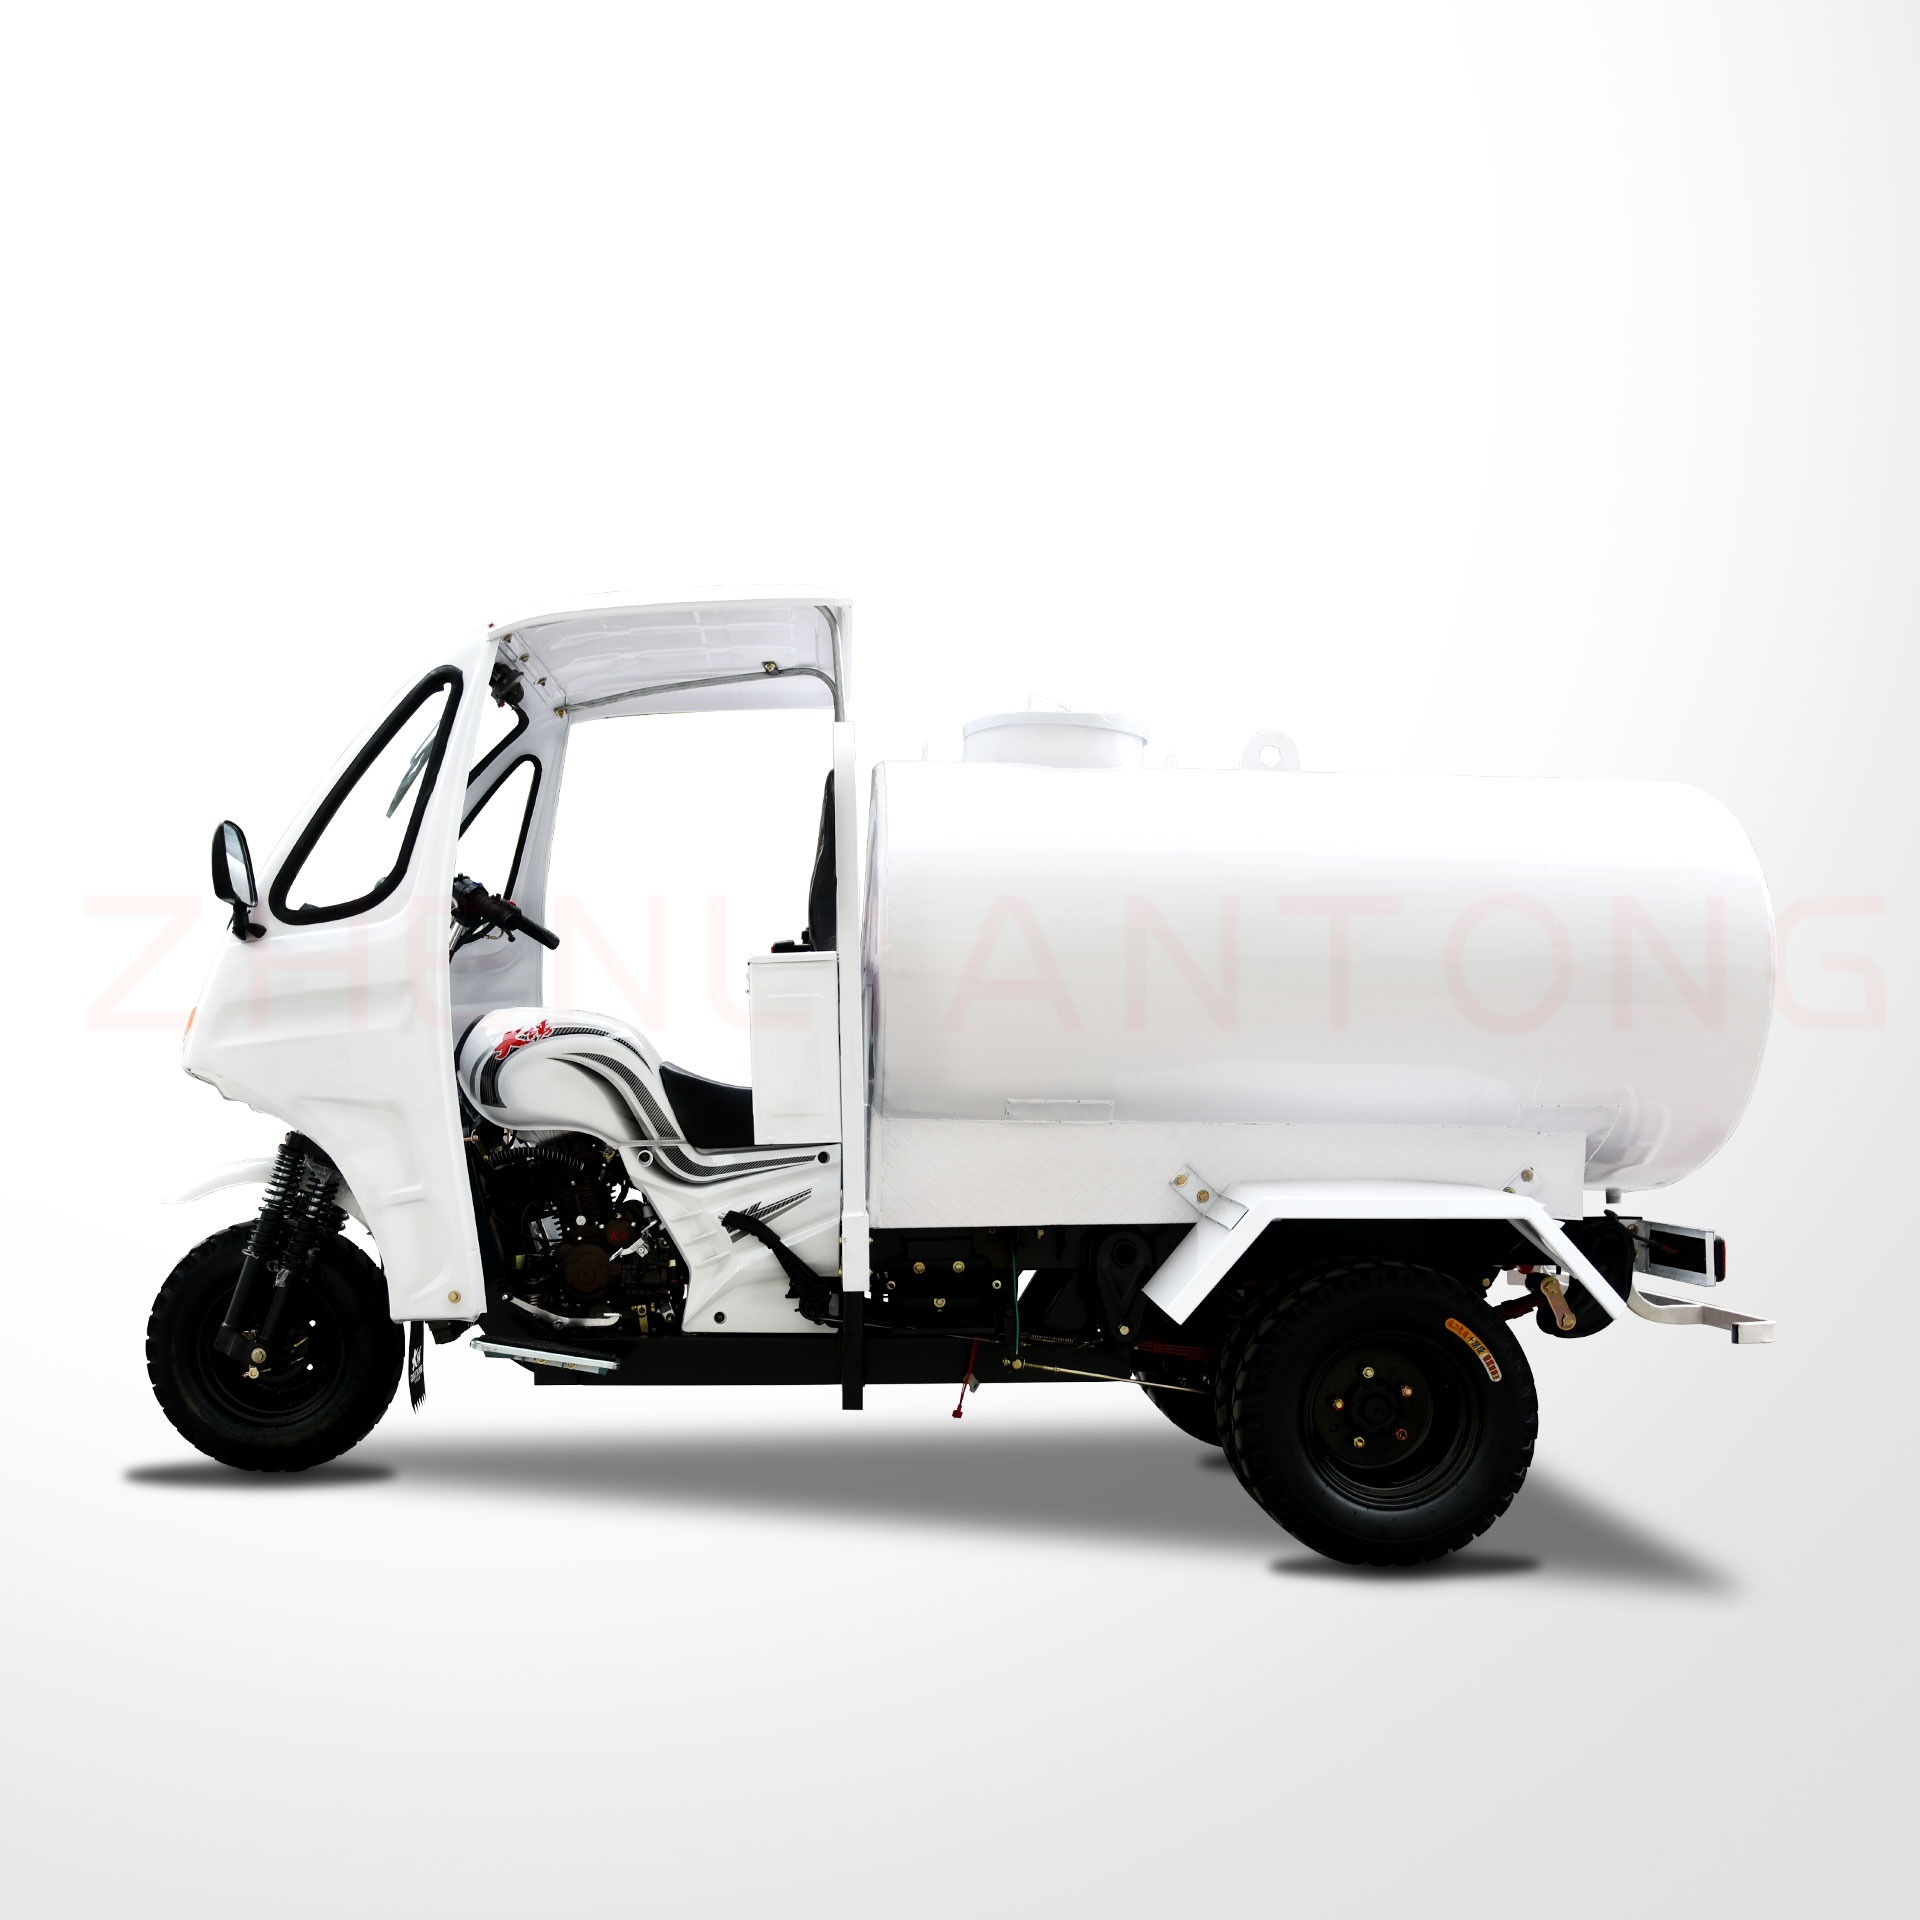 Chongqing 250cc Air Cooled 175cc Cabin Motor Tricycle Taxi Car China with Cargo Box for Adult Motorized 201 - 250cc 200cc Closed